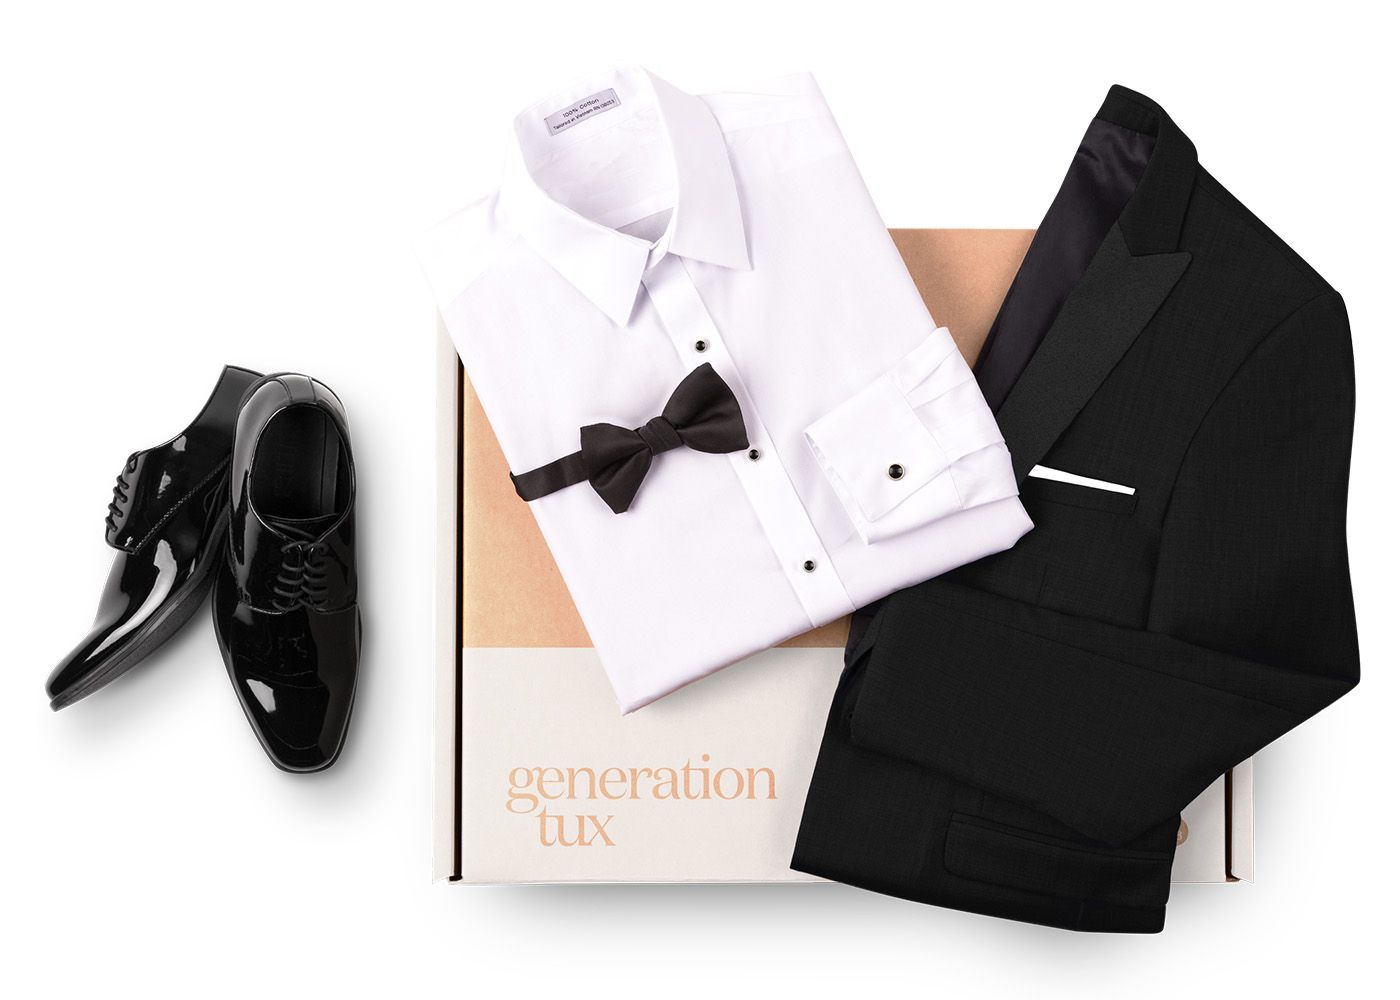 a box of all the Generation Tux necessities 